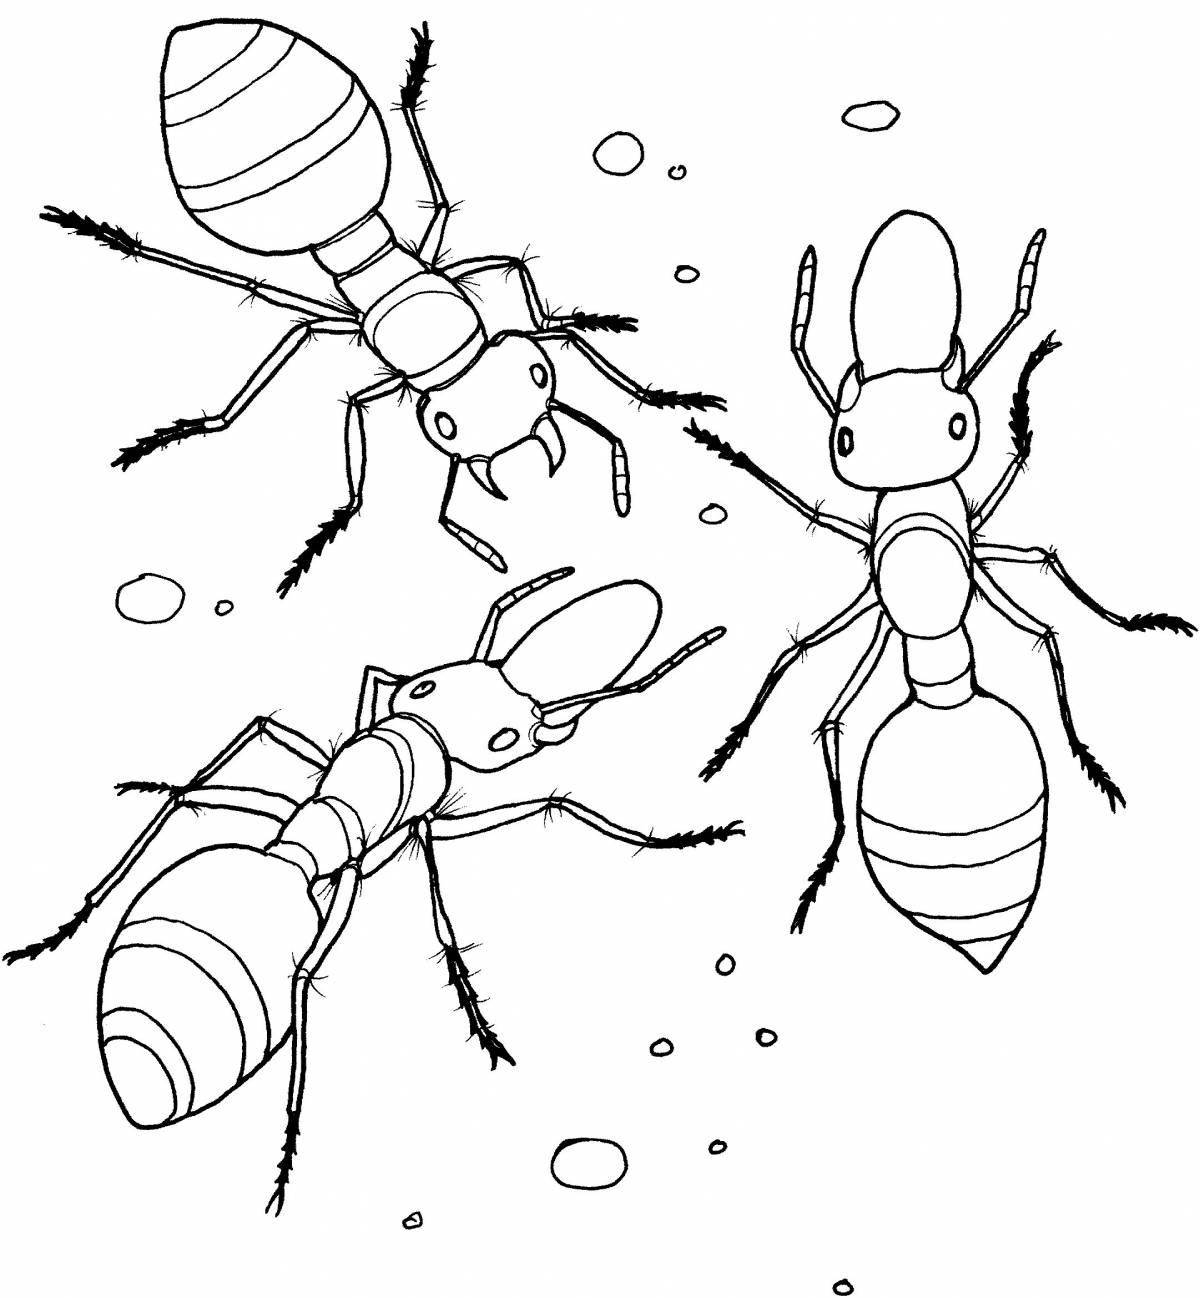 Bright drawing of an ant